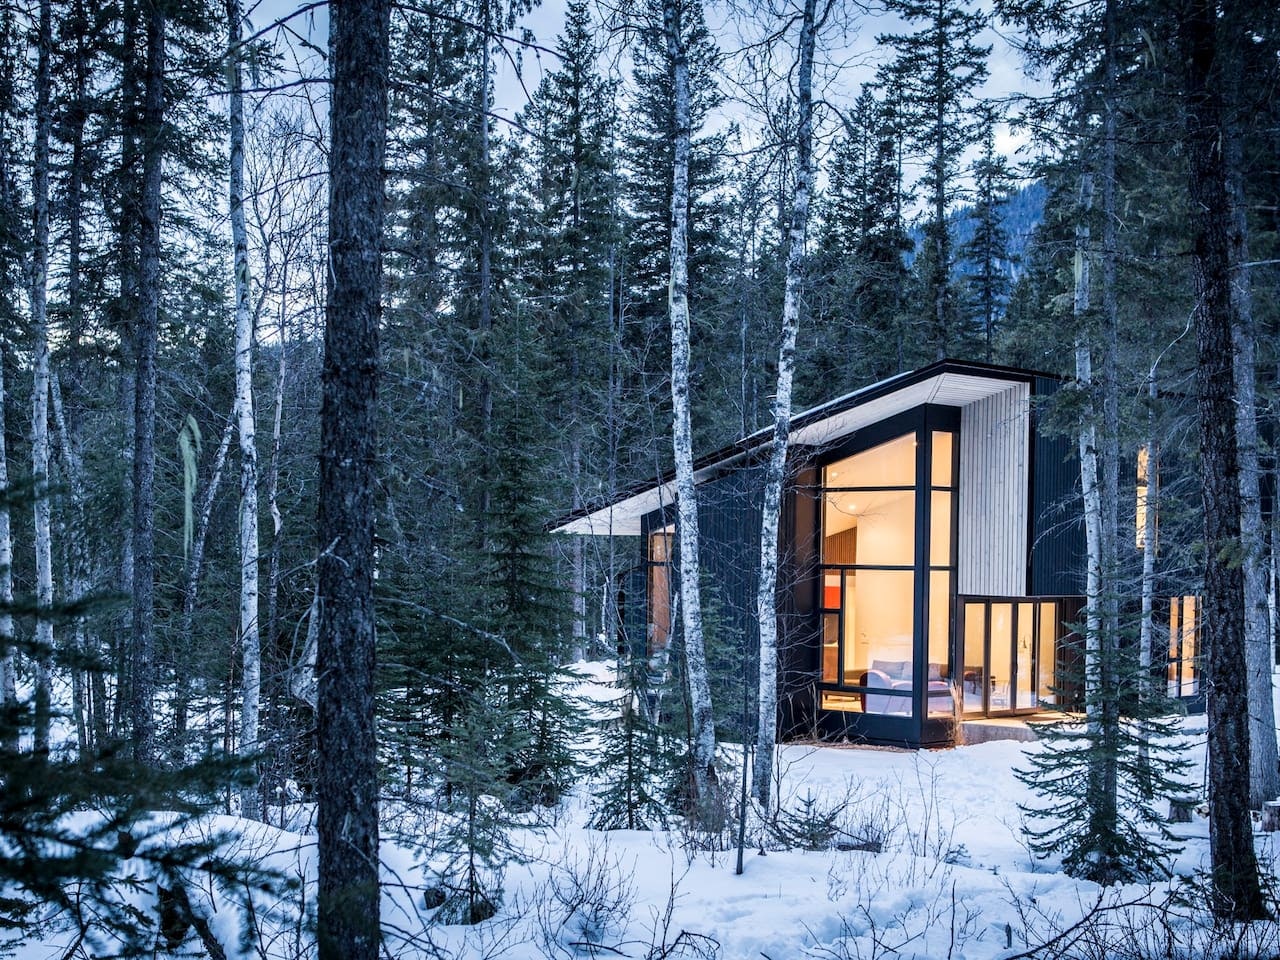 The Dreamiest, Most Romantic Cabin Getaways on Airbnb